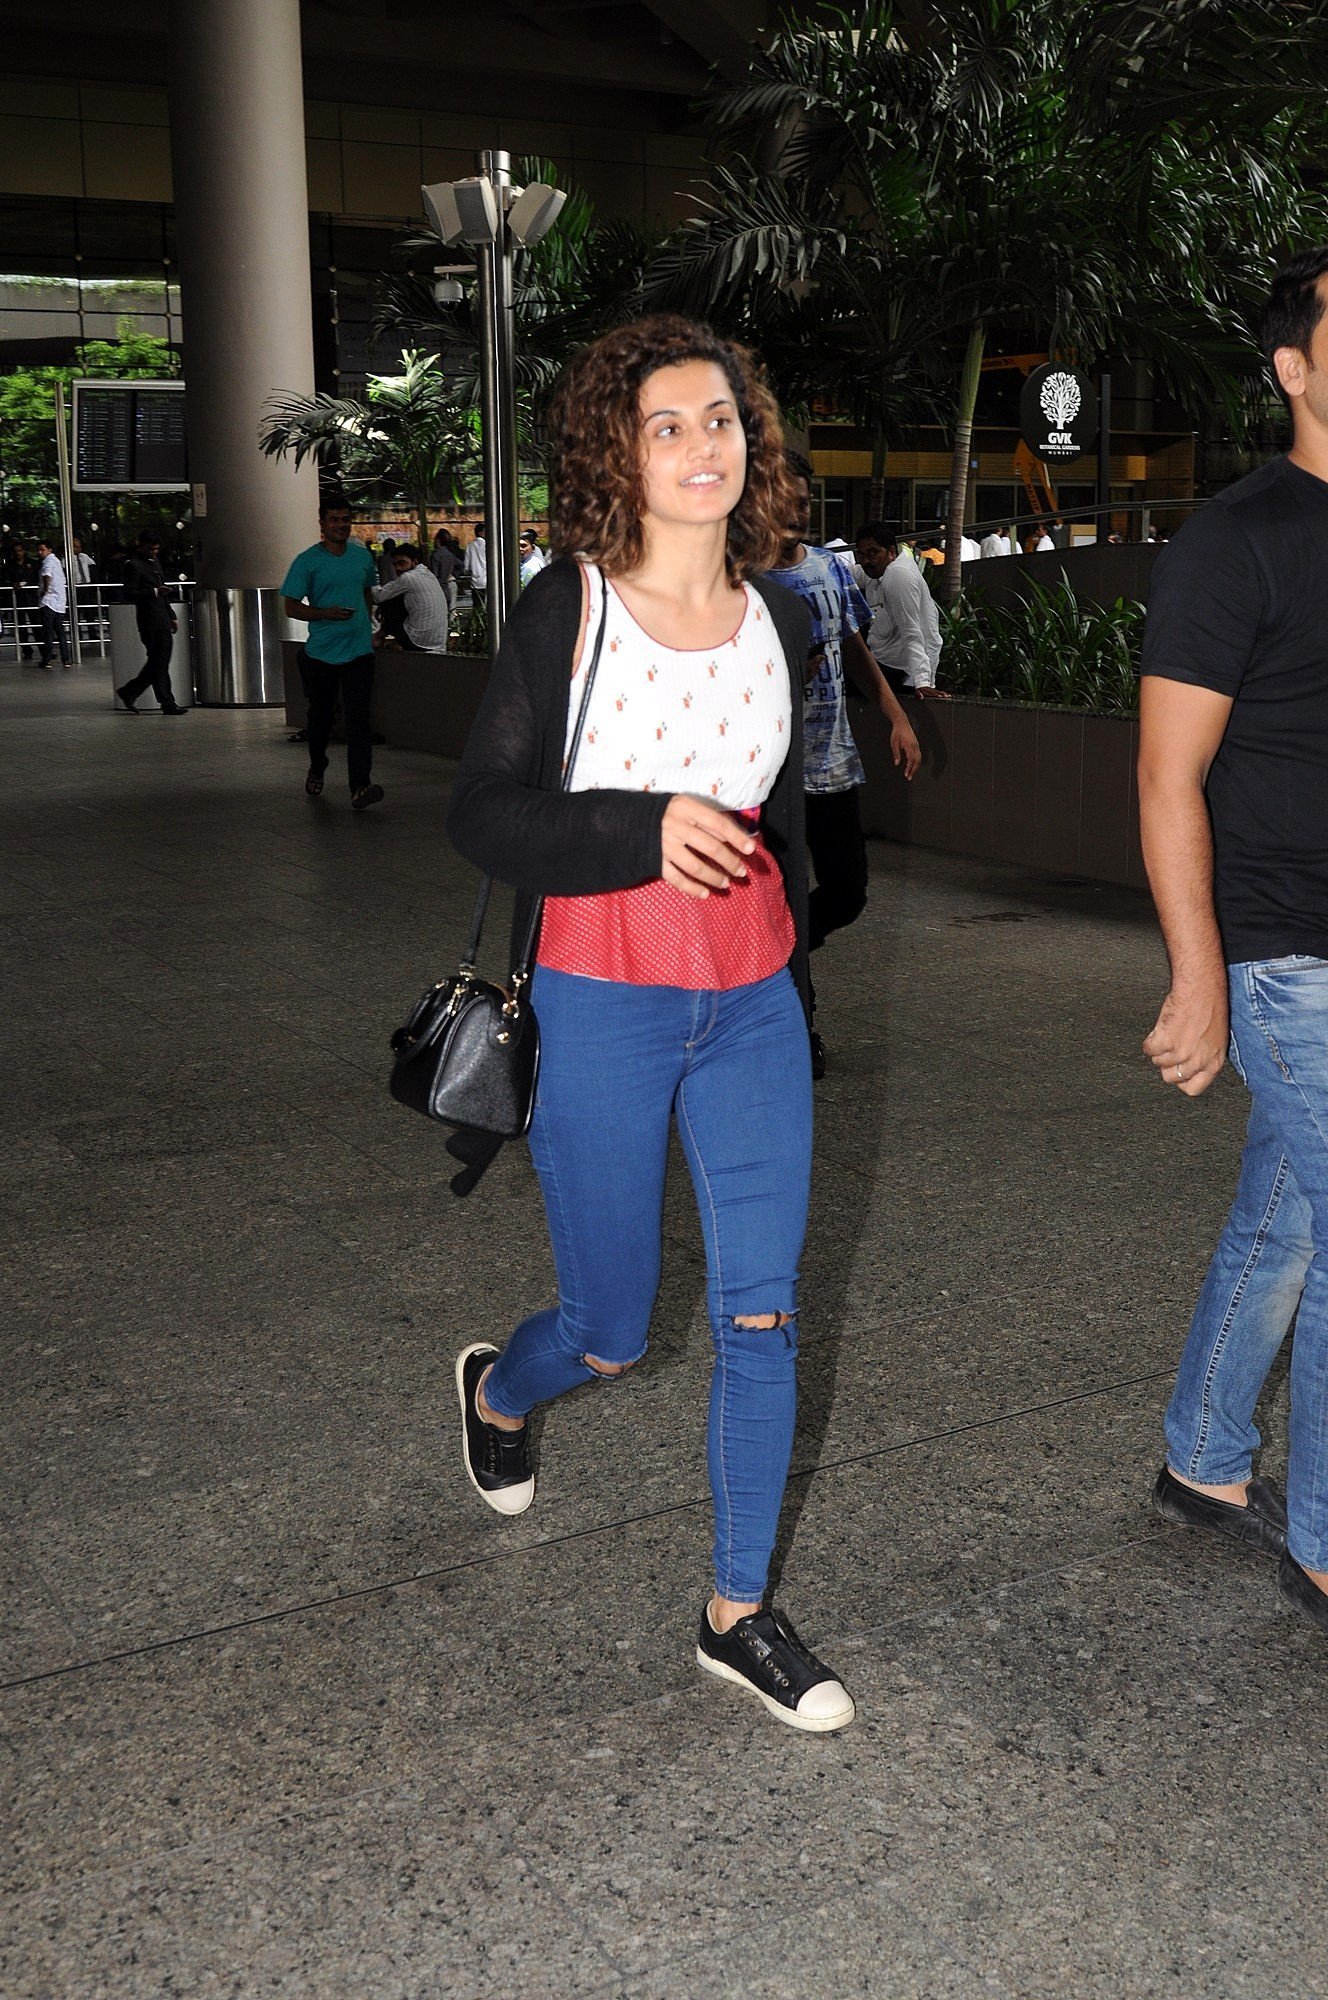 Taapsee Pannu - Celebrities Spotted at Airport | Picture 1520812